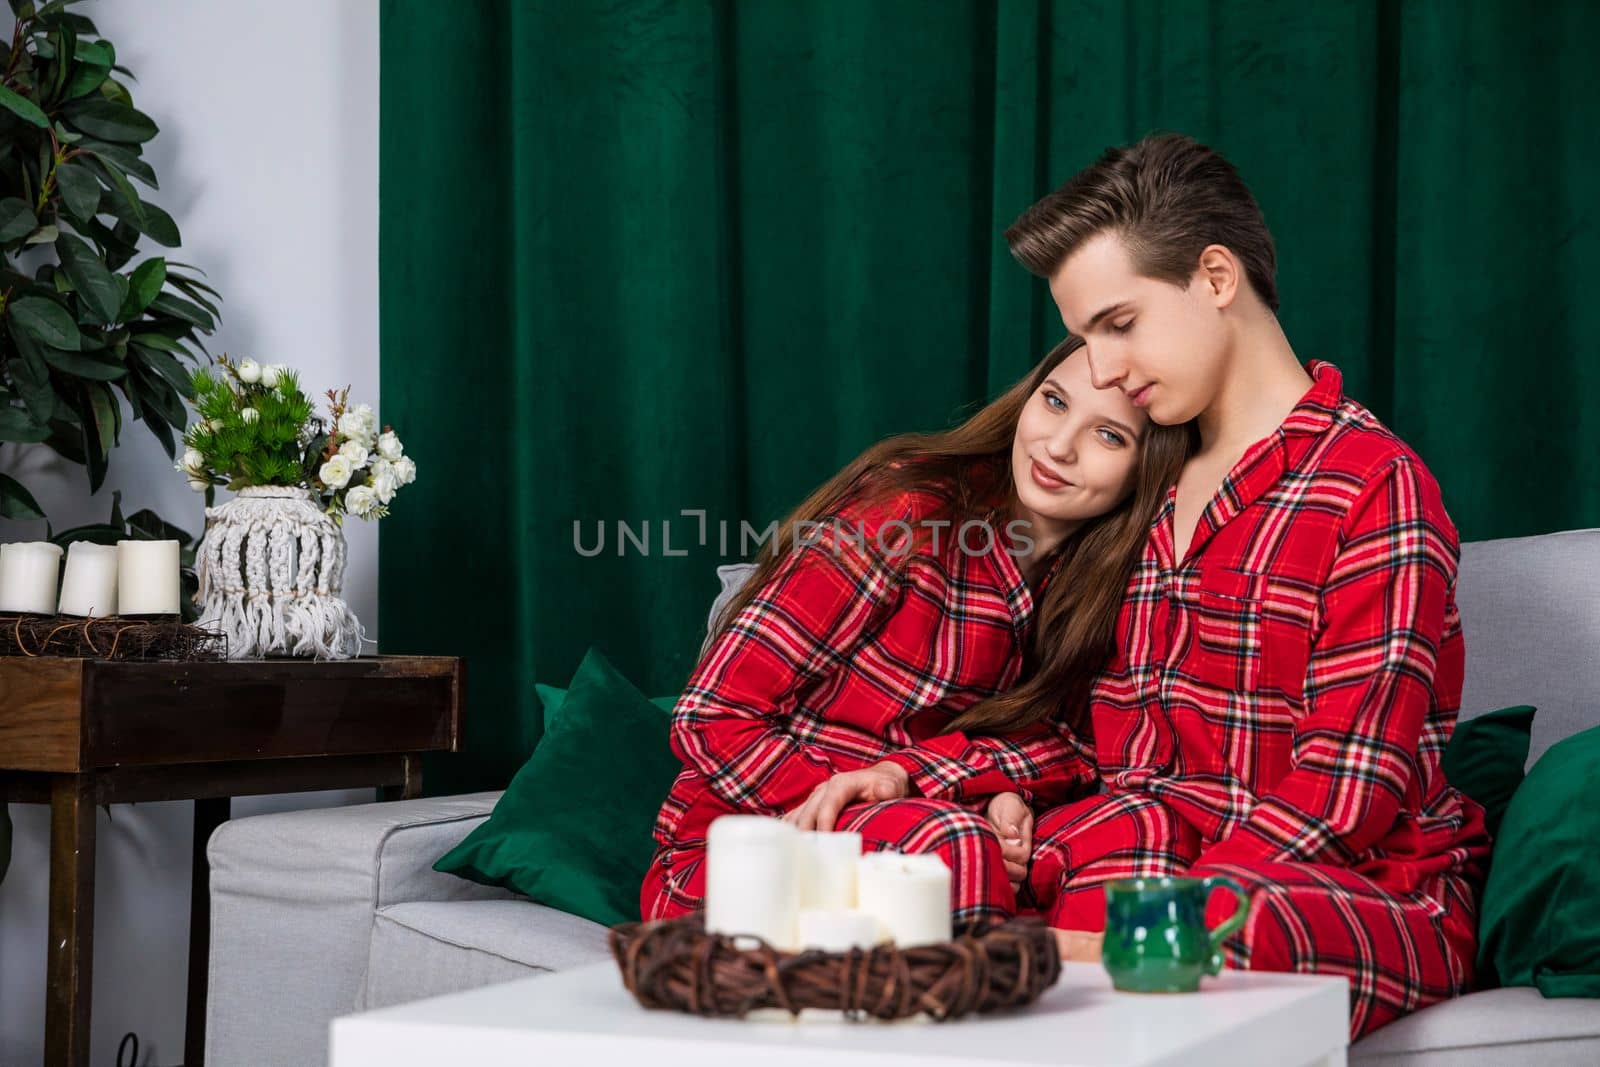 A couple in love posing for a session in a romantic interior. The wife cuddles up to her husband while sitting on a gray couch. In the background, behind the couch, is a heavy, dark green curtain